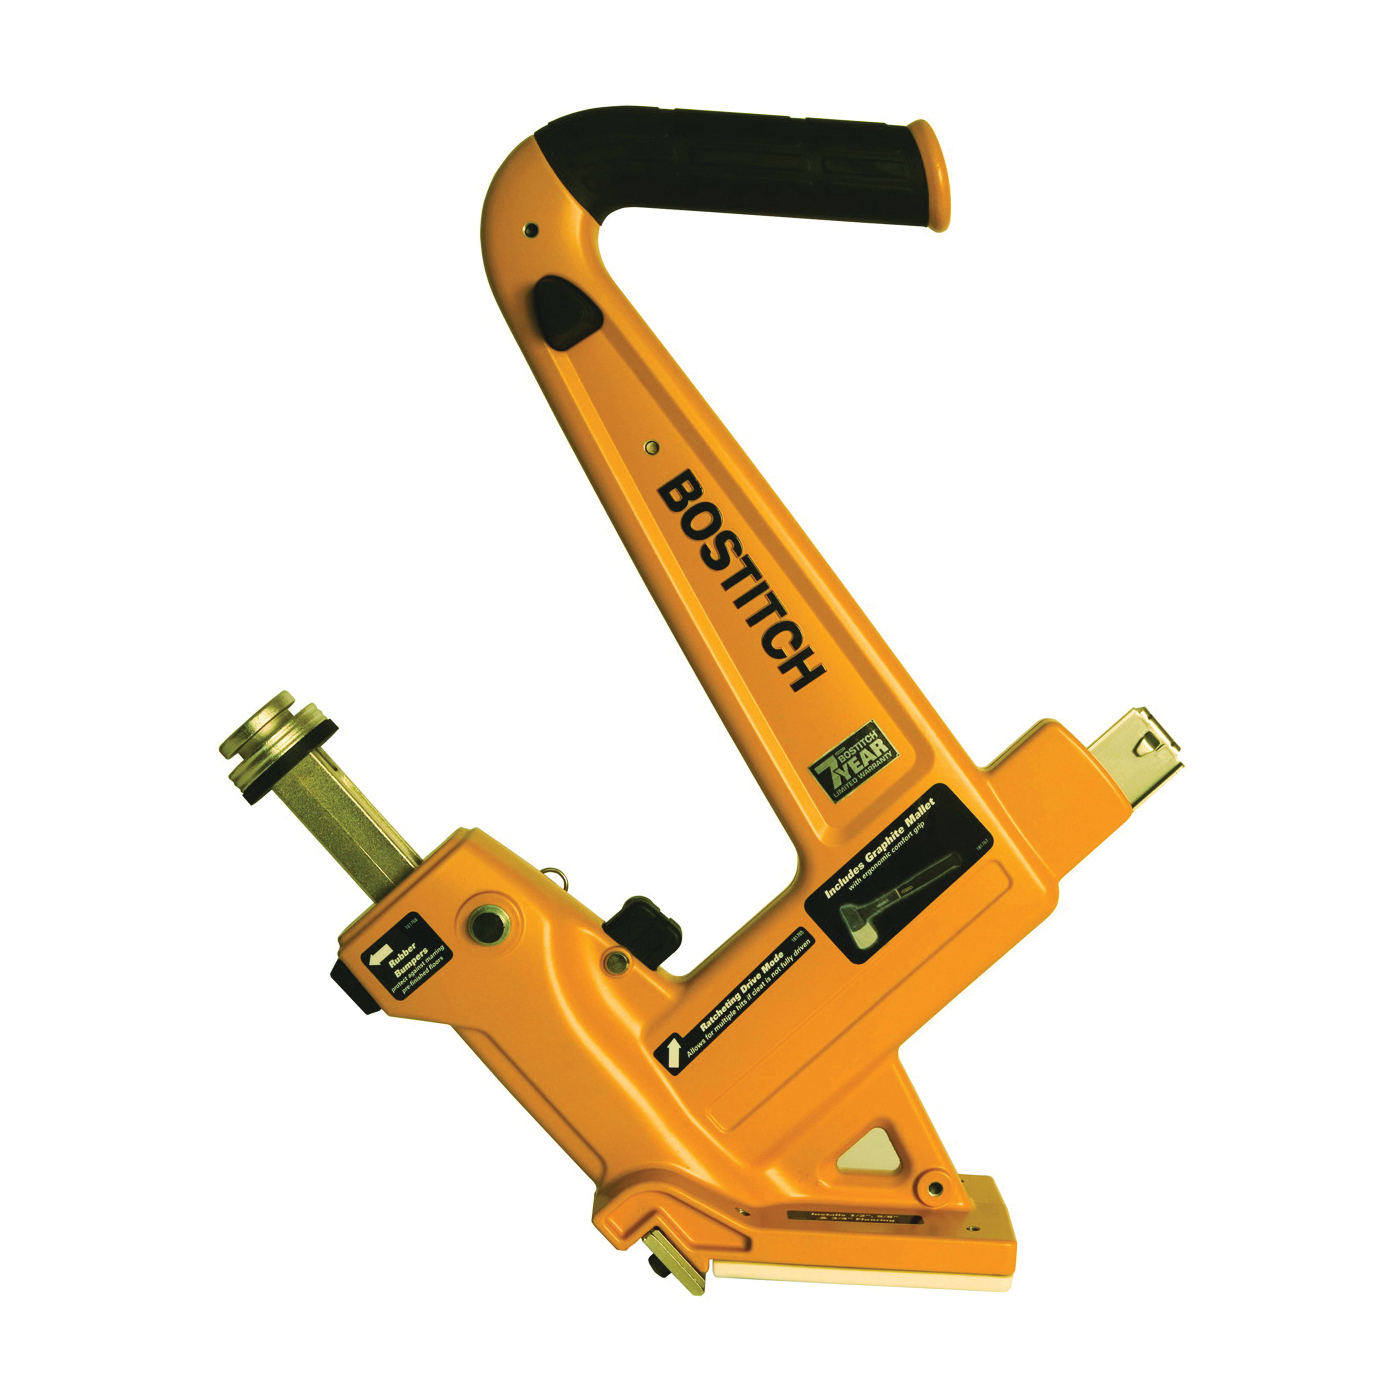 MFN-201 Flooring Cleat Nailer, 120 Magazine, 1-1/2 to 2 in L Fastener